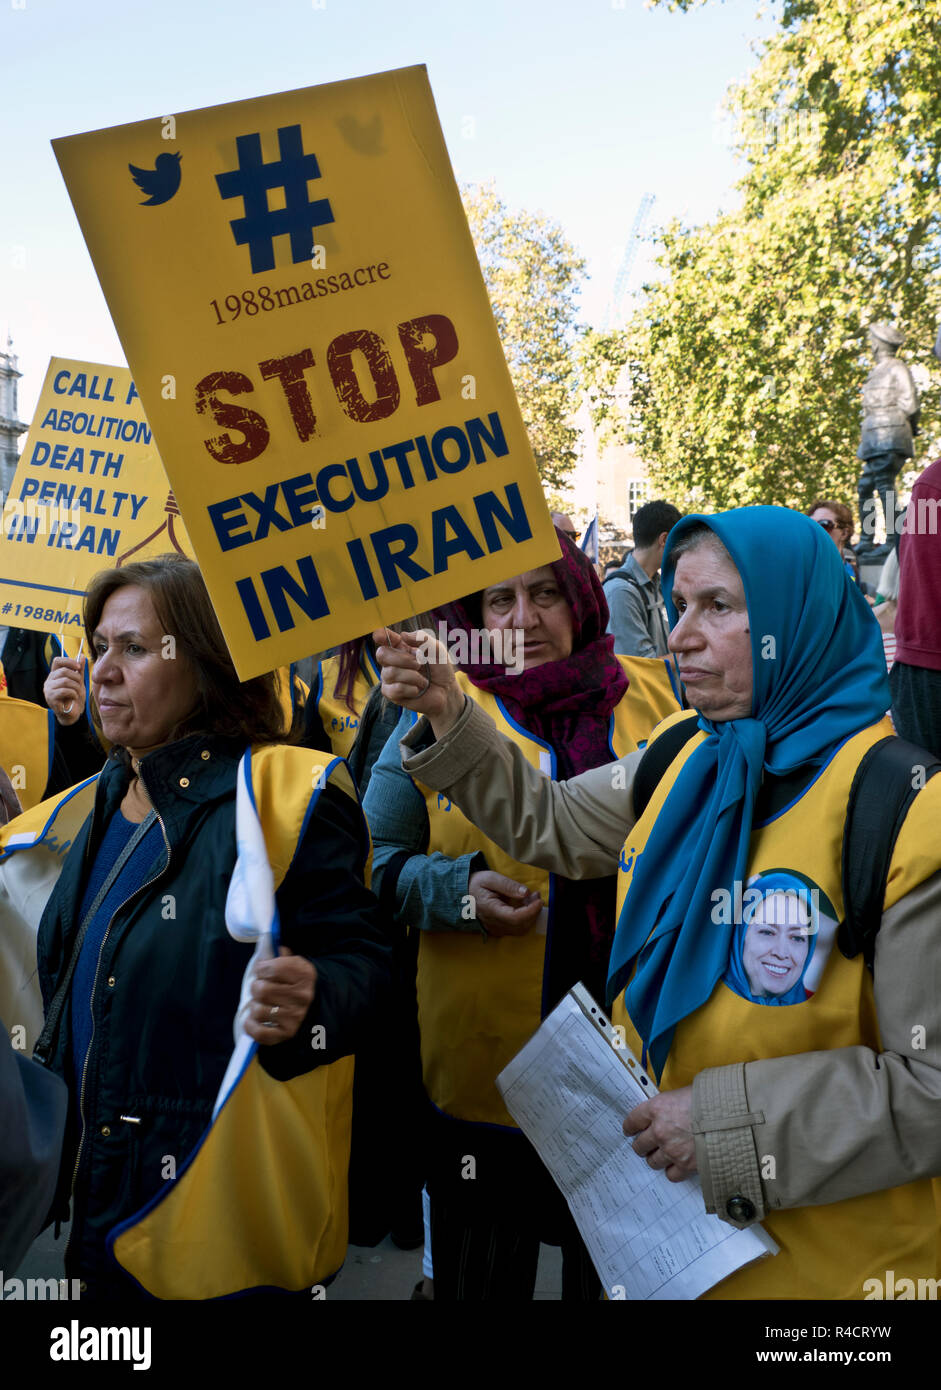 Iranian protesters protesting about executions in Iran in London outside Downing Street. Stock Photo